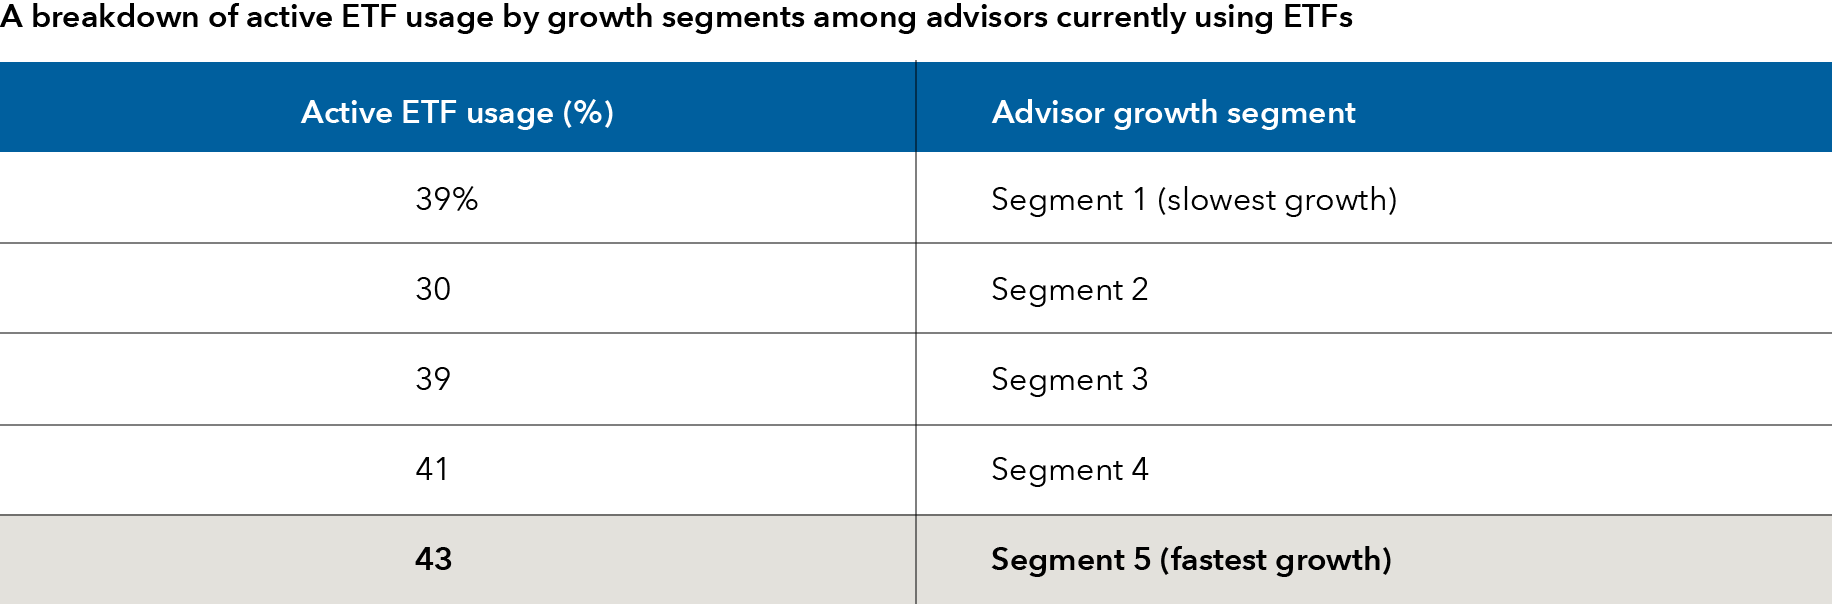 A table showing the percentage of active ETF usage by advisor growth segment. In segment 1, which represents the slowest growth advisors in the study, active ETF usage was 39%. In segment 2, it was 30%. In segment 3, it was 39%. In segment 4, it was 41%. And in segment 5, which represents the fastest growth advisors, active ETF usage was 43%. 